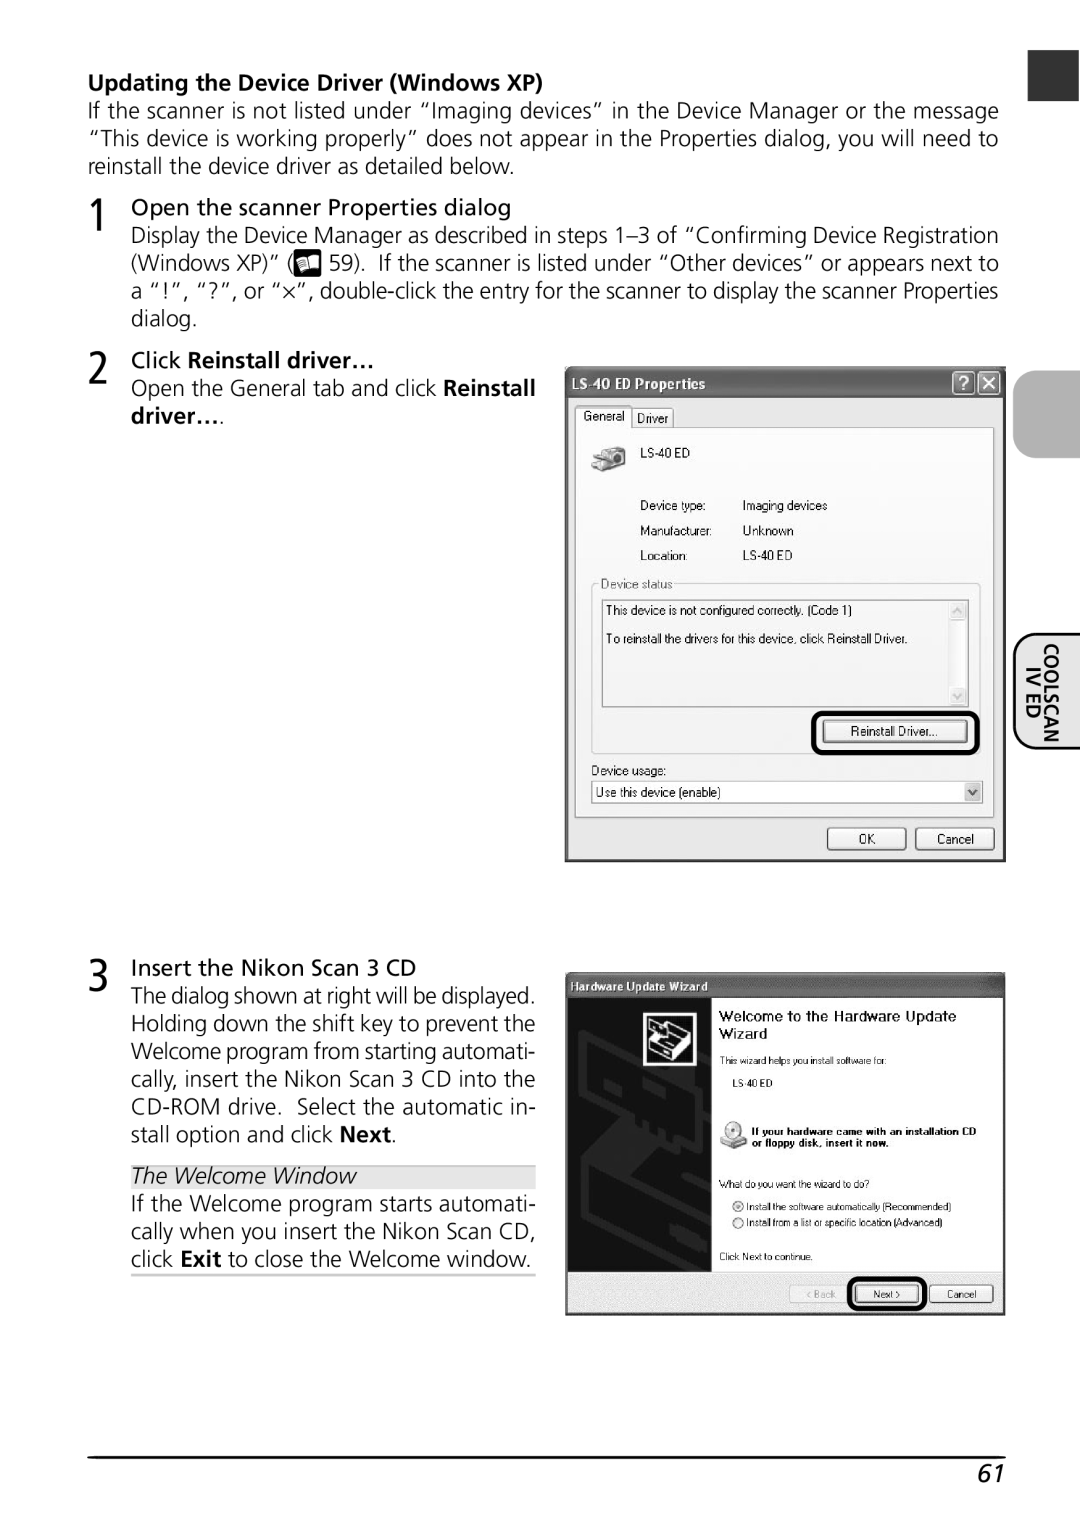 Nikon LS4000 user manual Click Reinstall driver…, Updating the Device Driver Windows XP 